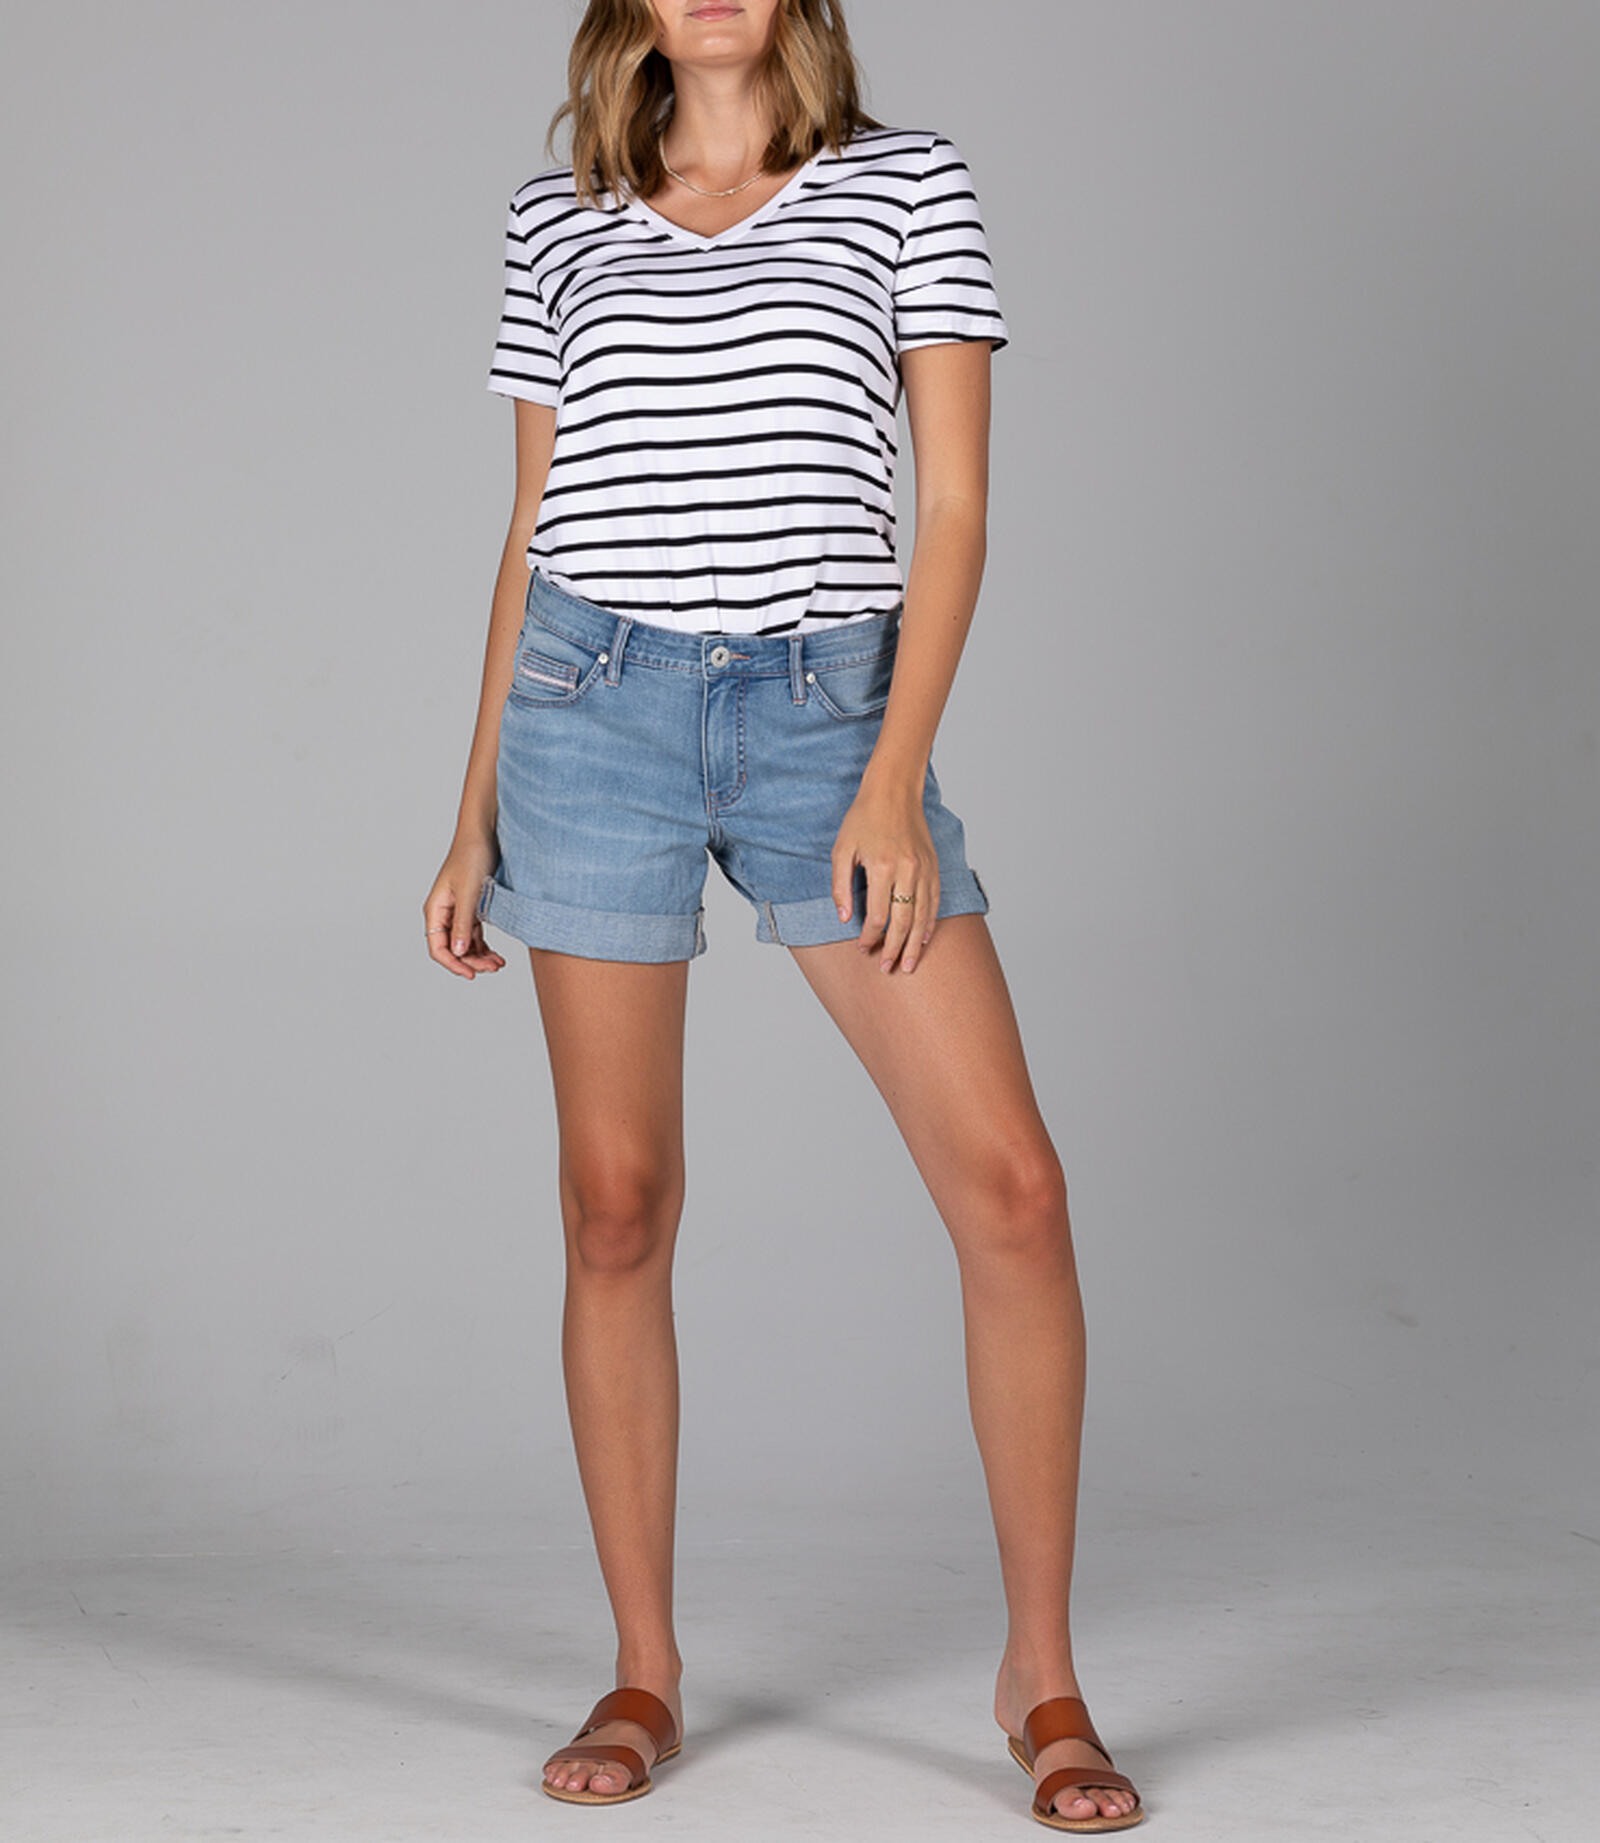 Buy Alex Mid Rise Boyfriend Shorts for USD 17.00 | Jag Jeans US New